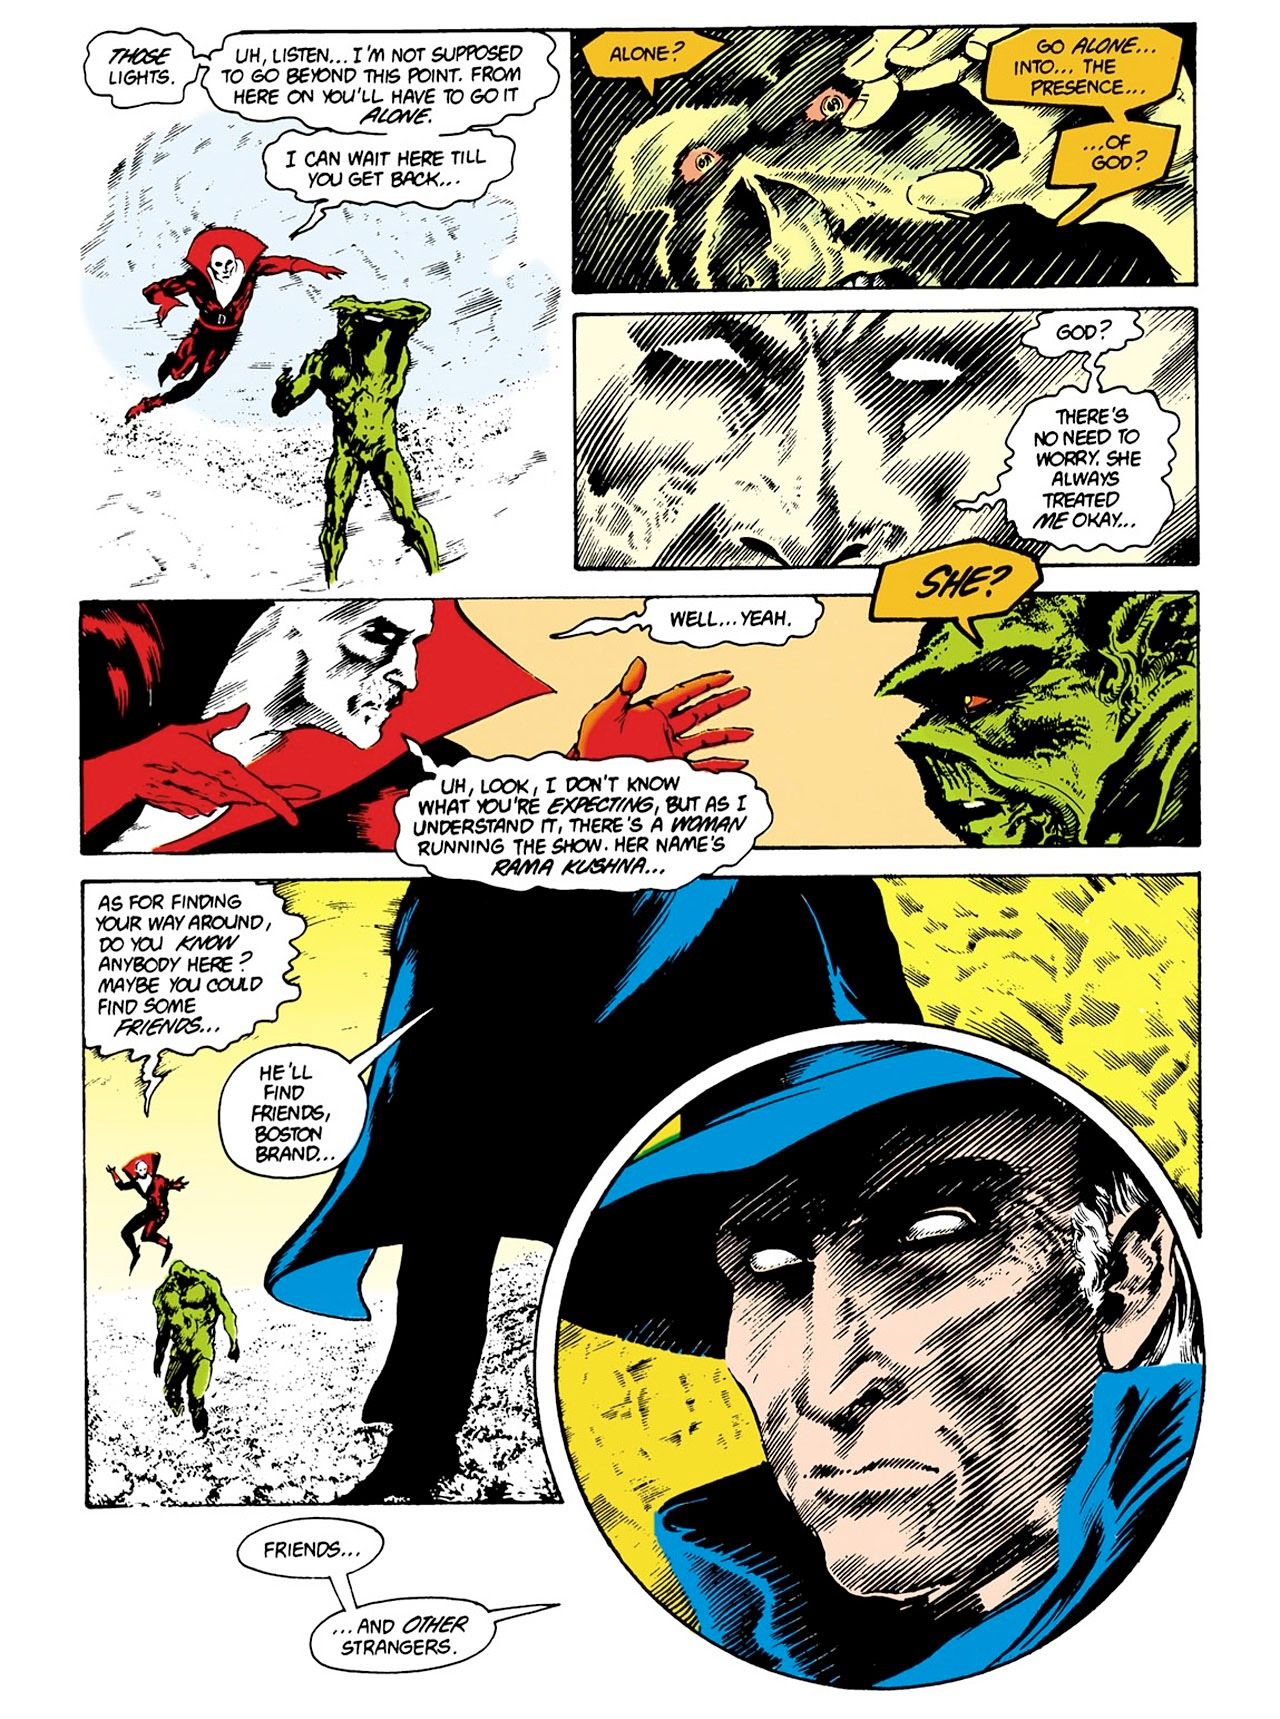 A Bob Dylan reference in Swamp Thing Annual #2